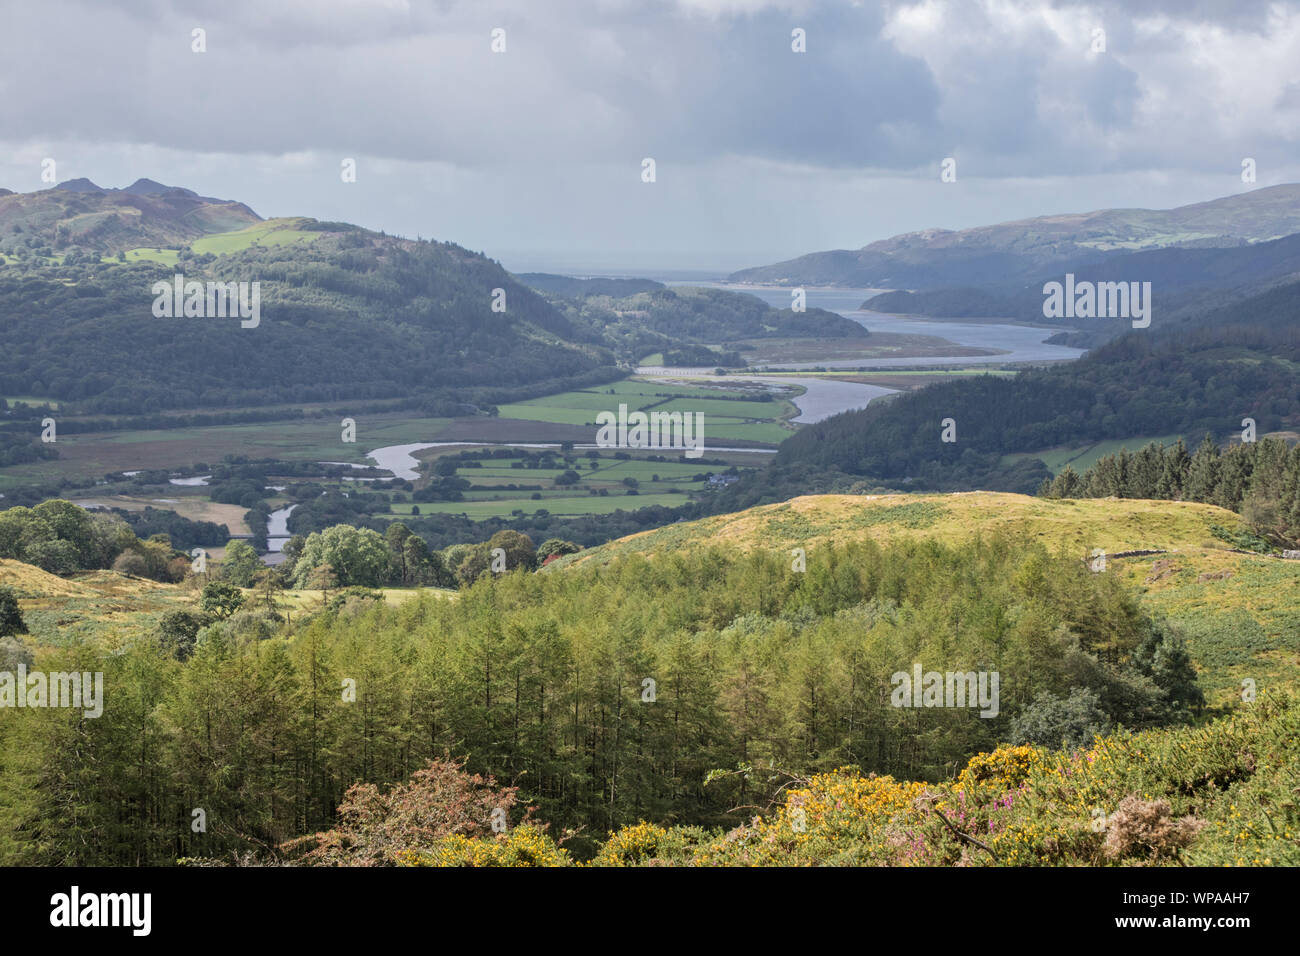 A view of the Mawddach Estuary from the Precipice Walk, Snowdonia National Park, North Wales, UK Stock Photo